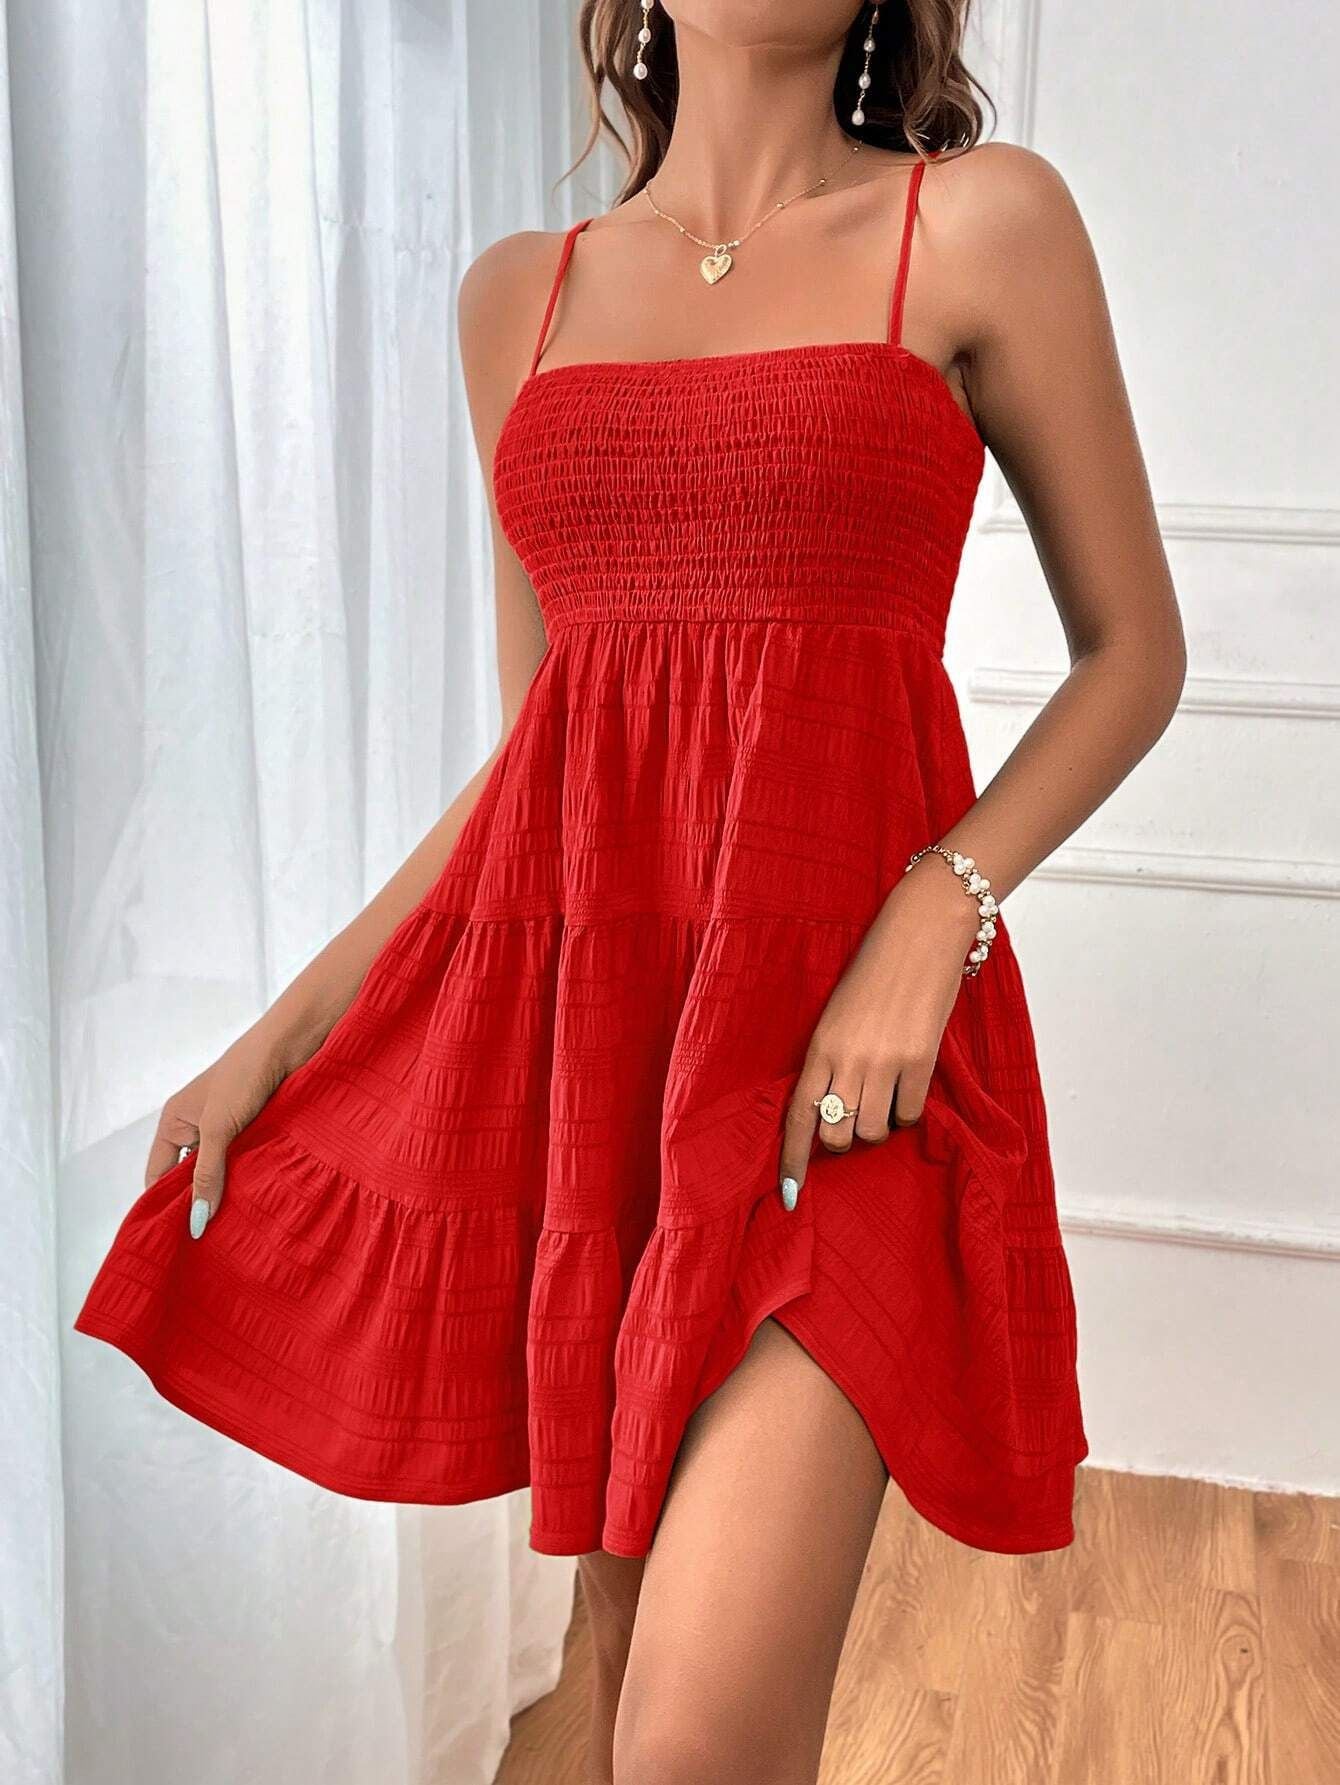 NEW Summer Square-collar Suspender Pleated Dress Fashion Solid Color Beach Dresses For Womens Clothing